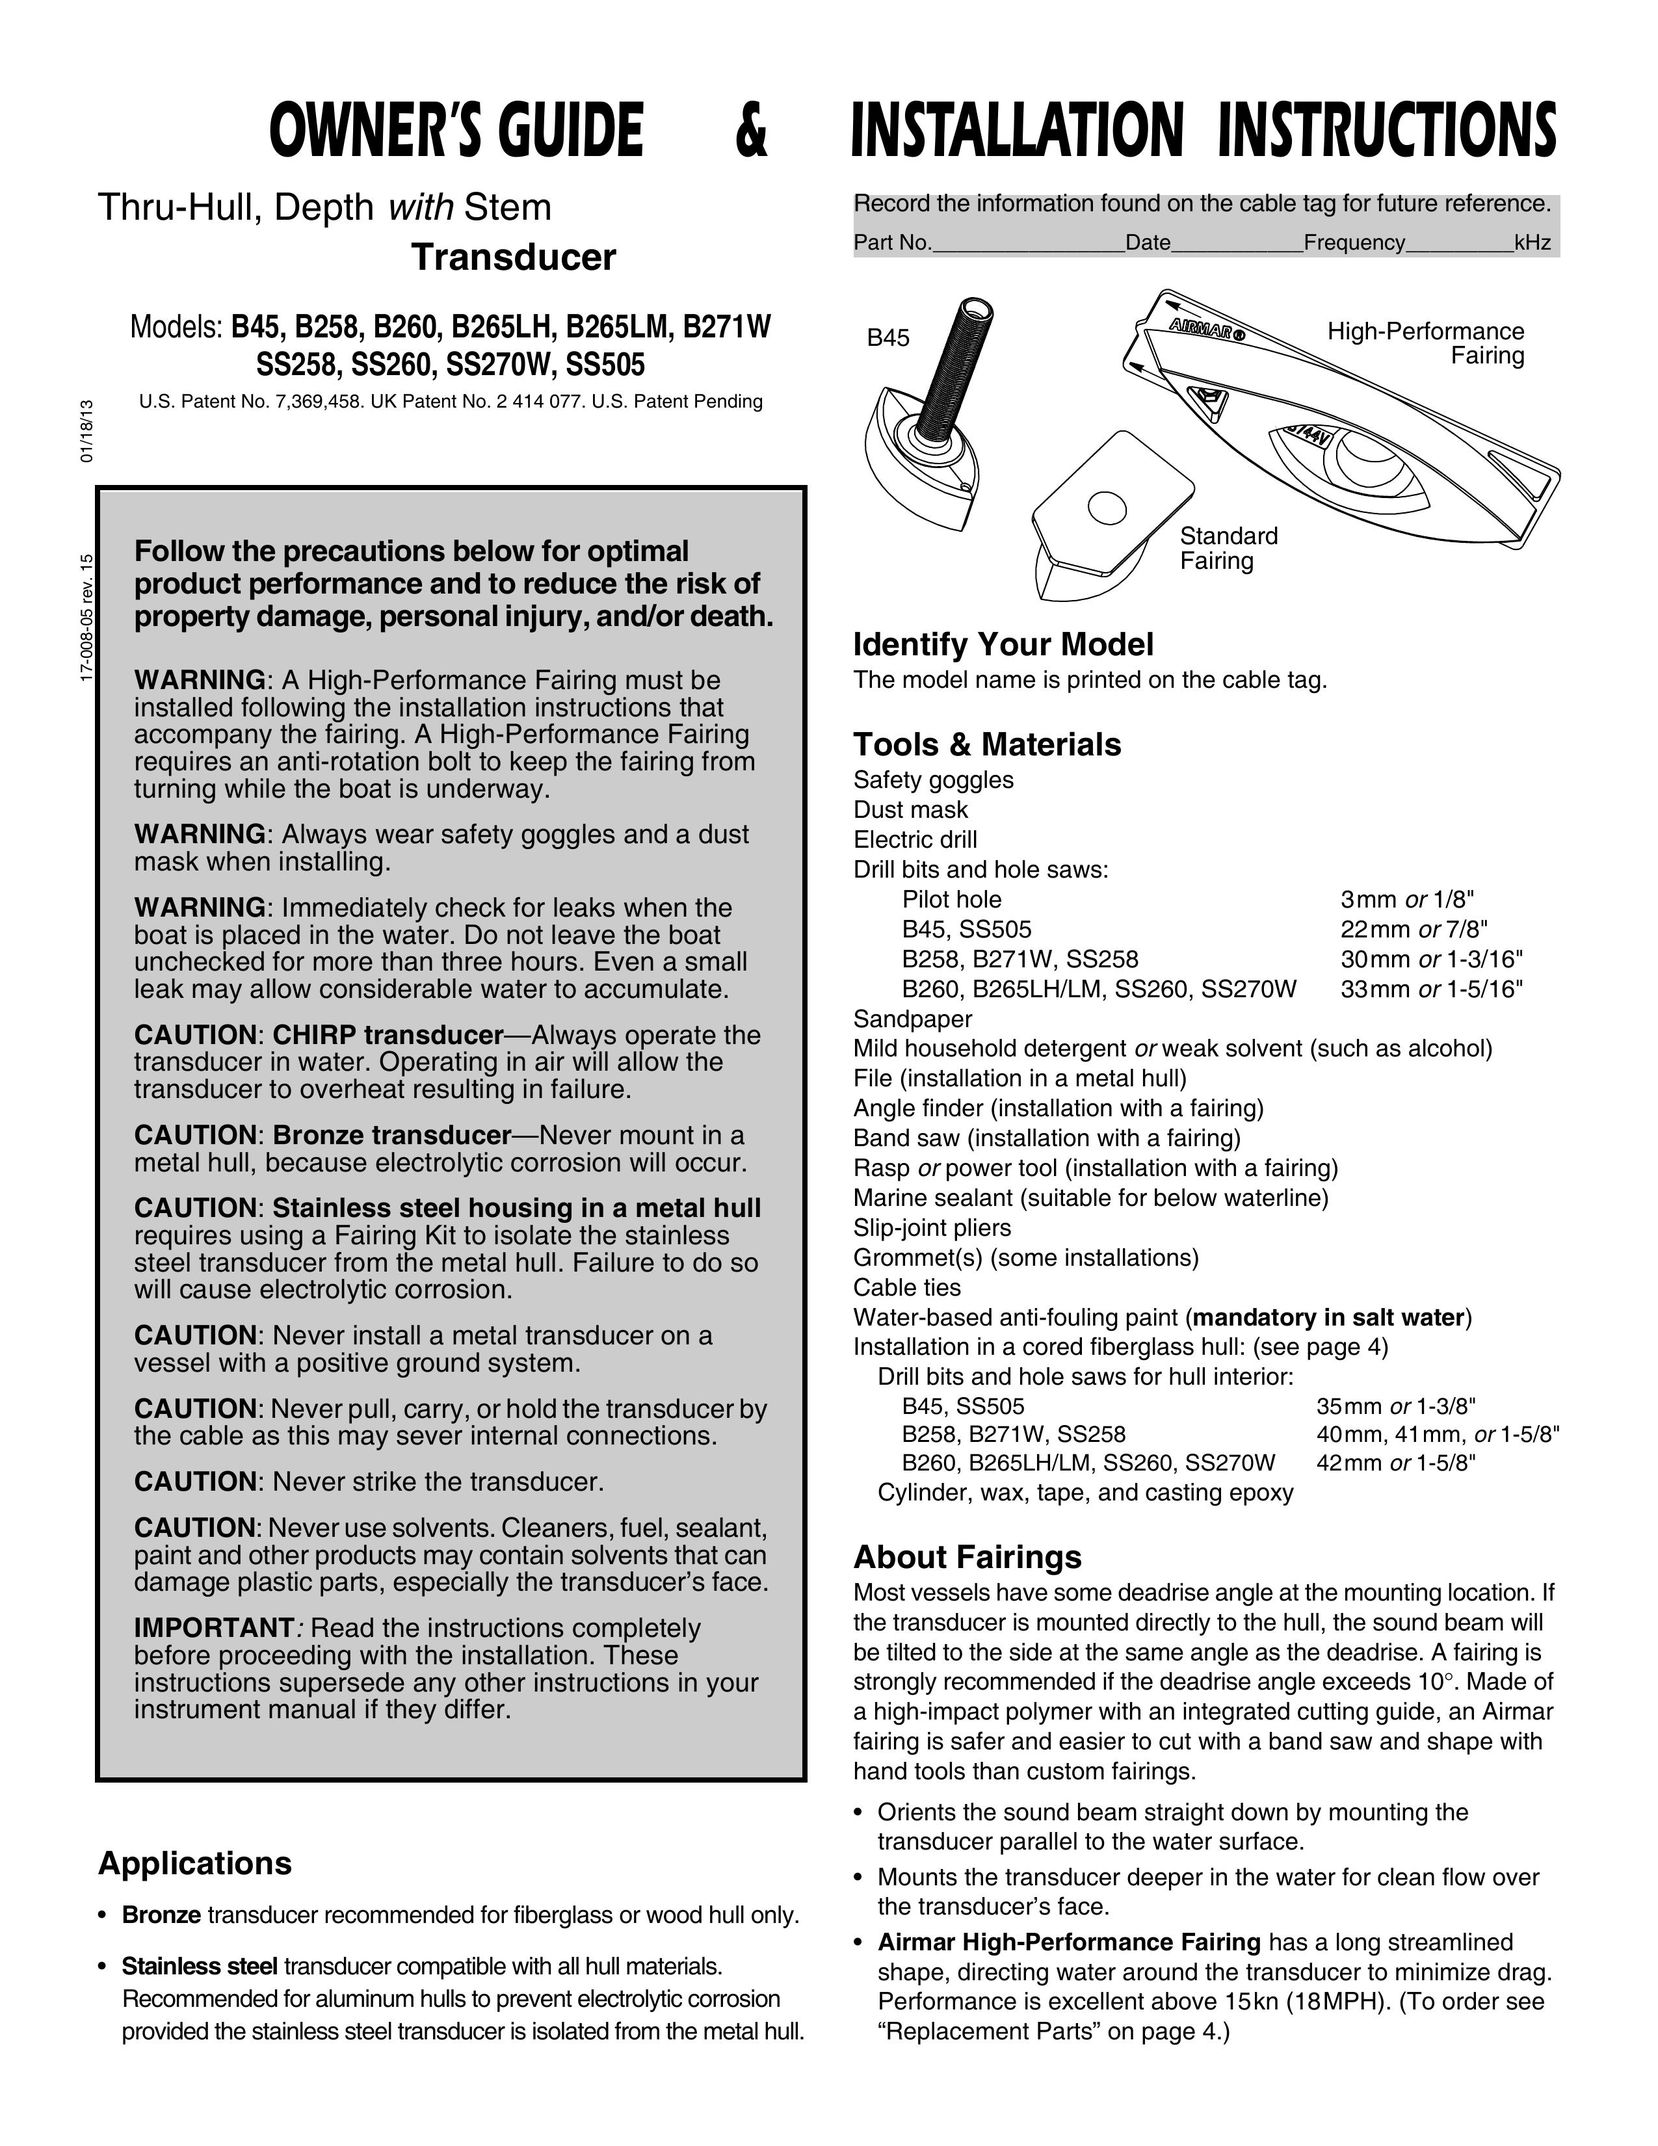 New Transducers SS270W Network Router User Manual